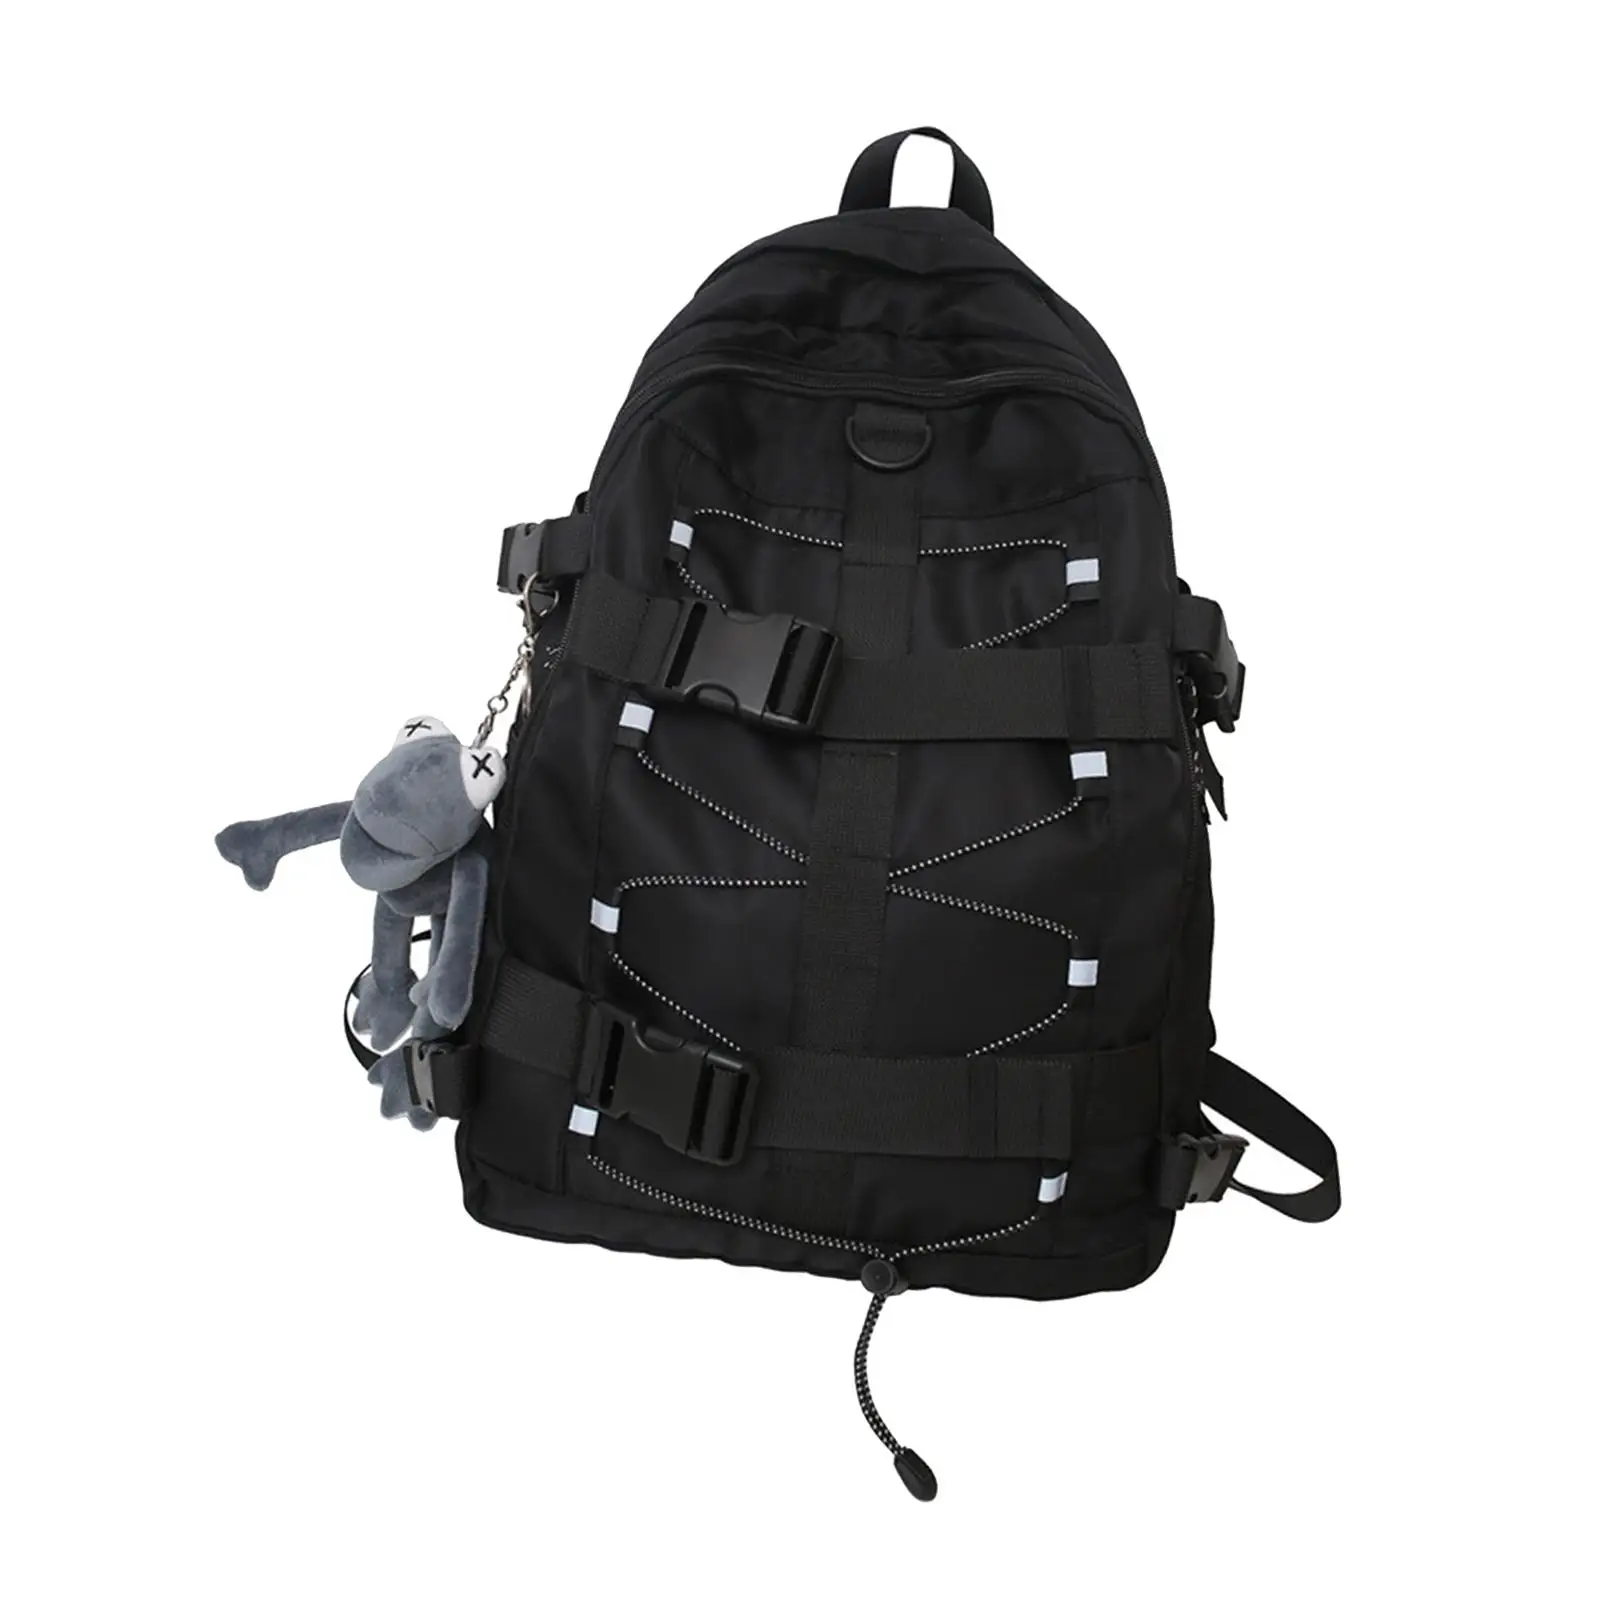 Ski Backpack Universal Carrier Male Travel Bags for Climbing Camping Adults